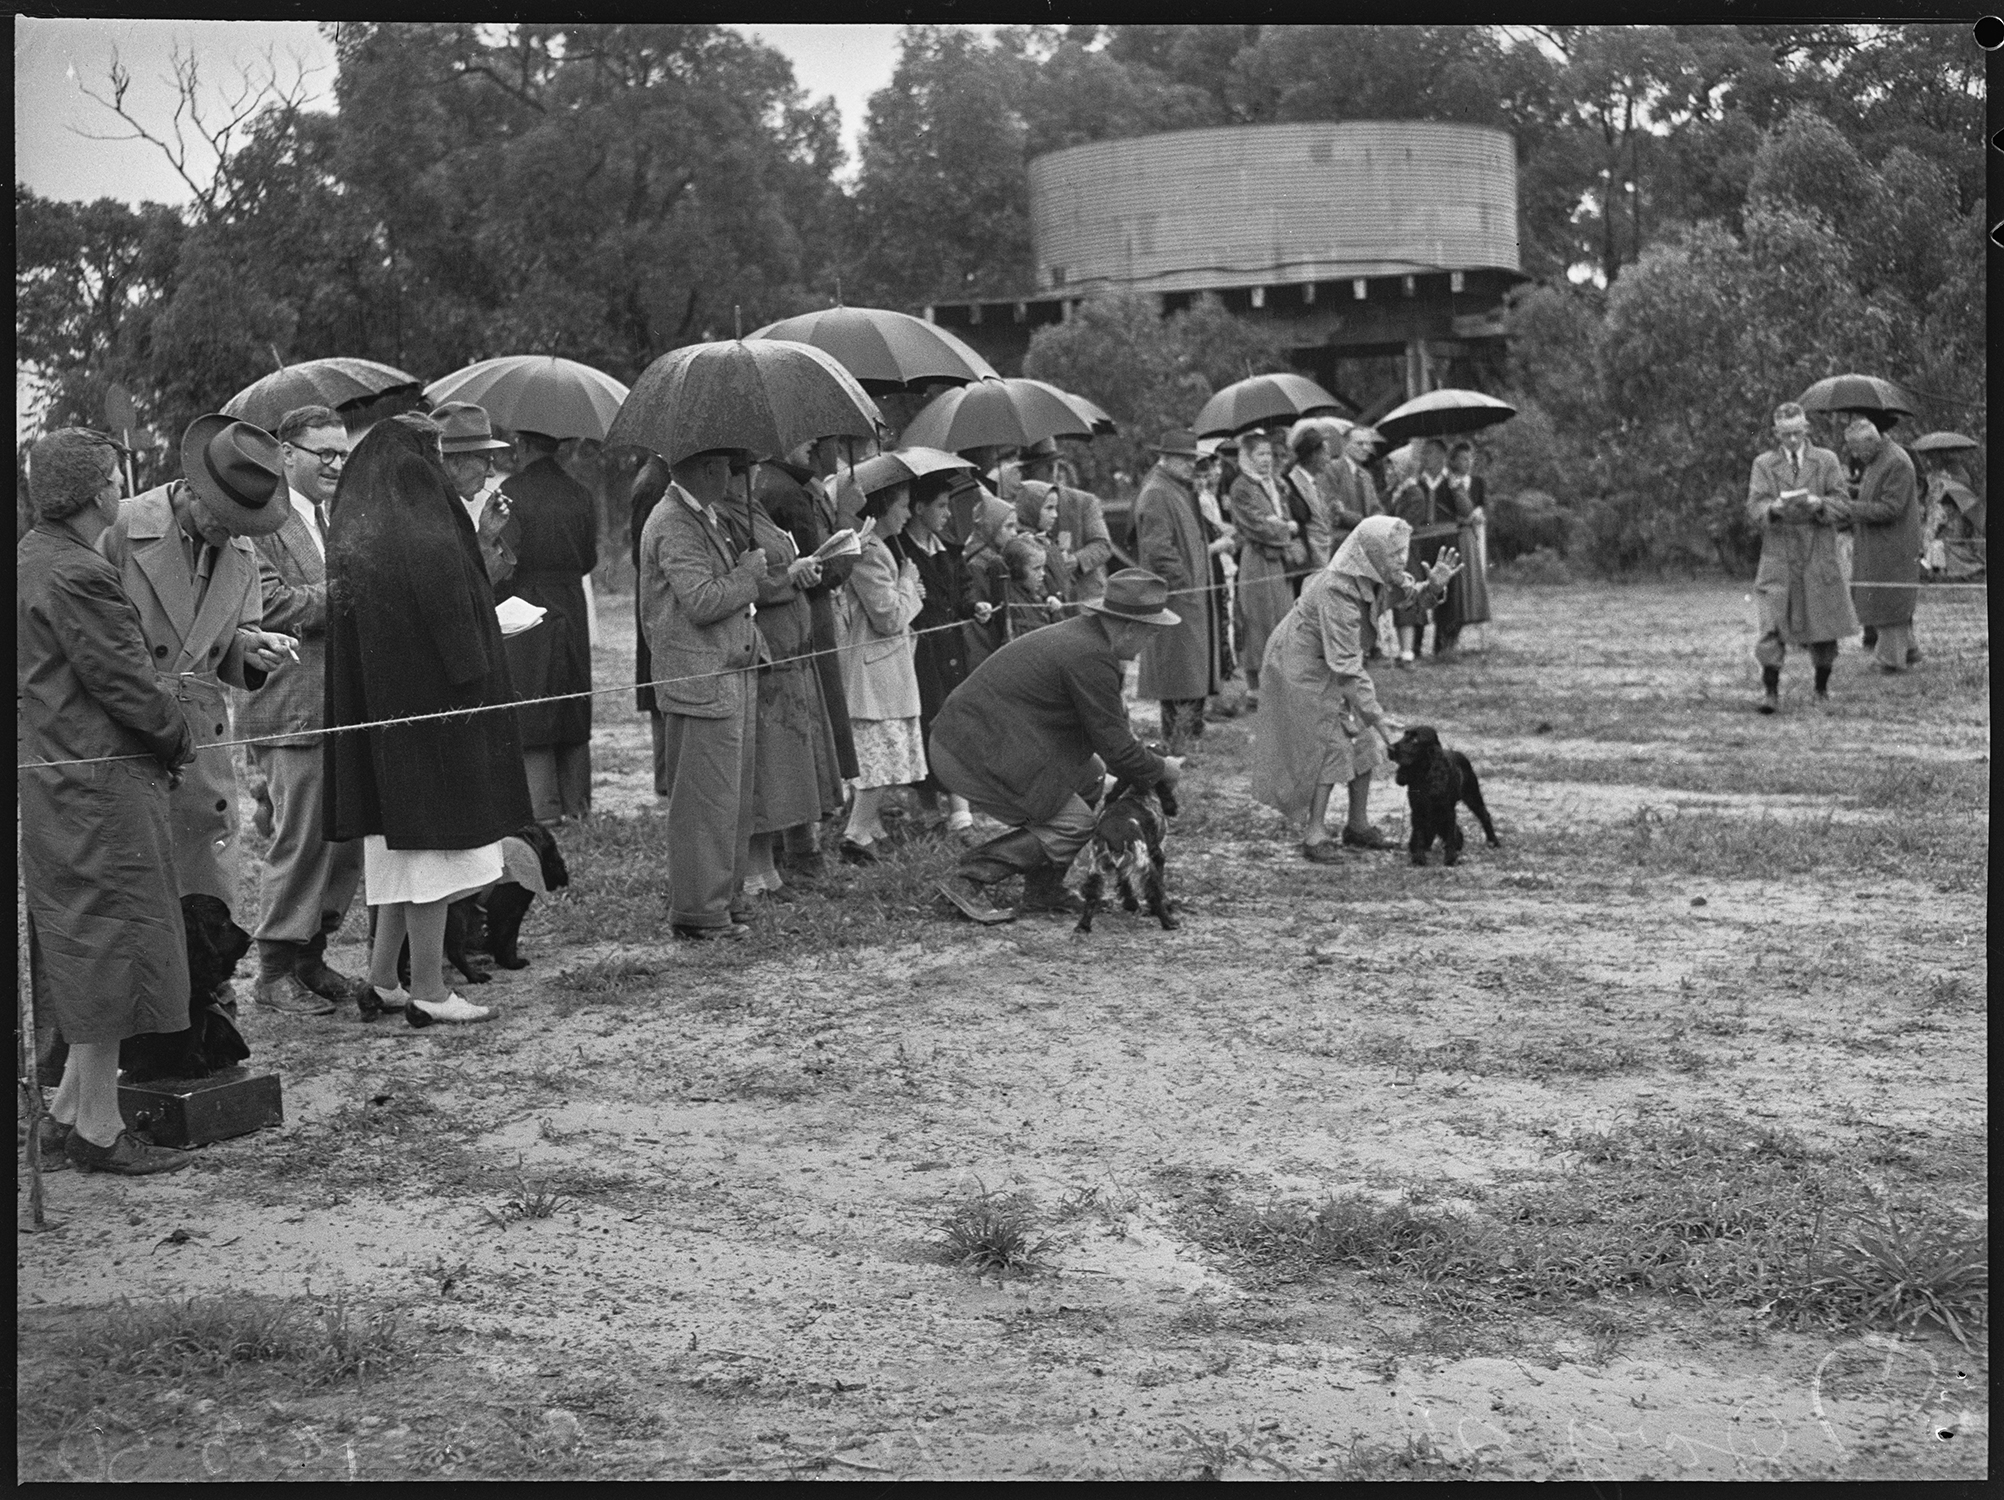 St. Ives Dog Show, 18 March, 1950, Pix Magazine, State Library of New South Wales